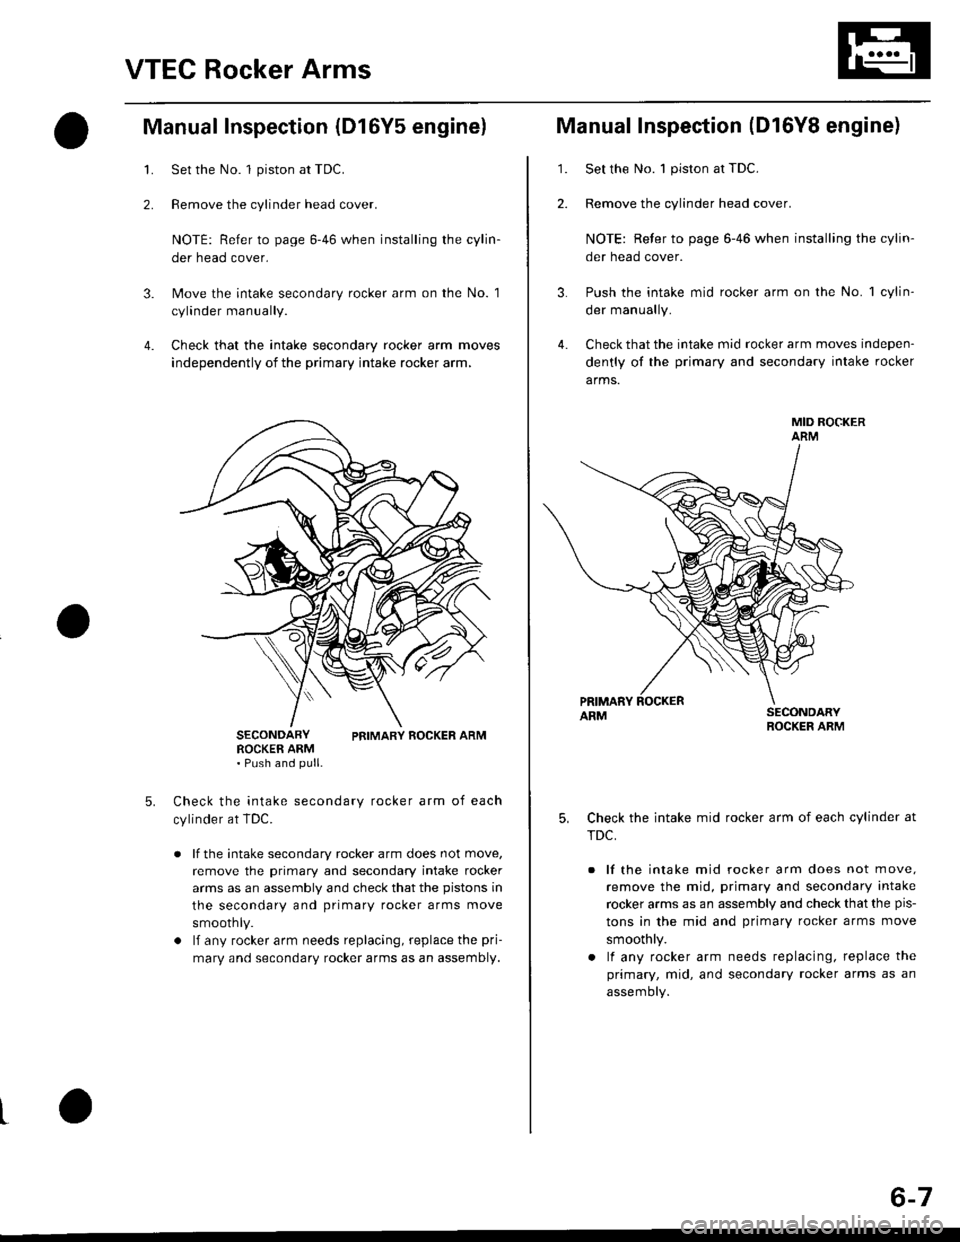 HONDA CIVIC 1998 6.G User Guide VTEC Rocker Arms
2.
Manual Inspection (D16Y5 engine)
3.
1.
4.
Set the No. 1 piston at TDC.
Remove the cylinder head cover.
NOTE: Refer to page 6-46 when installing the cylin-
der head cover.
Move the 